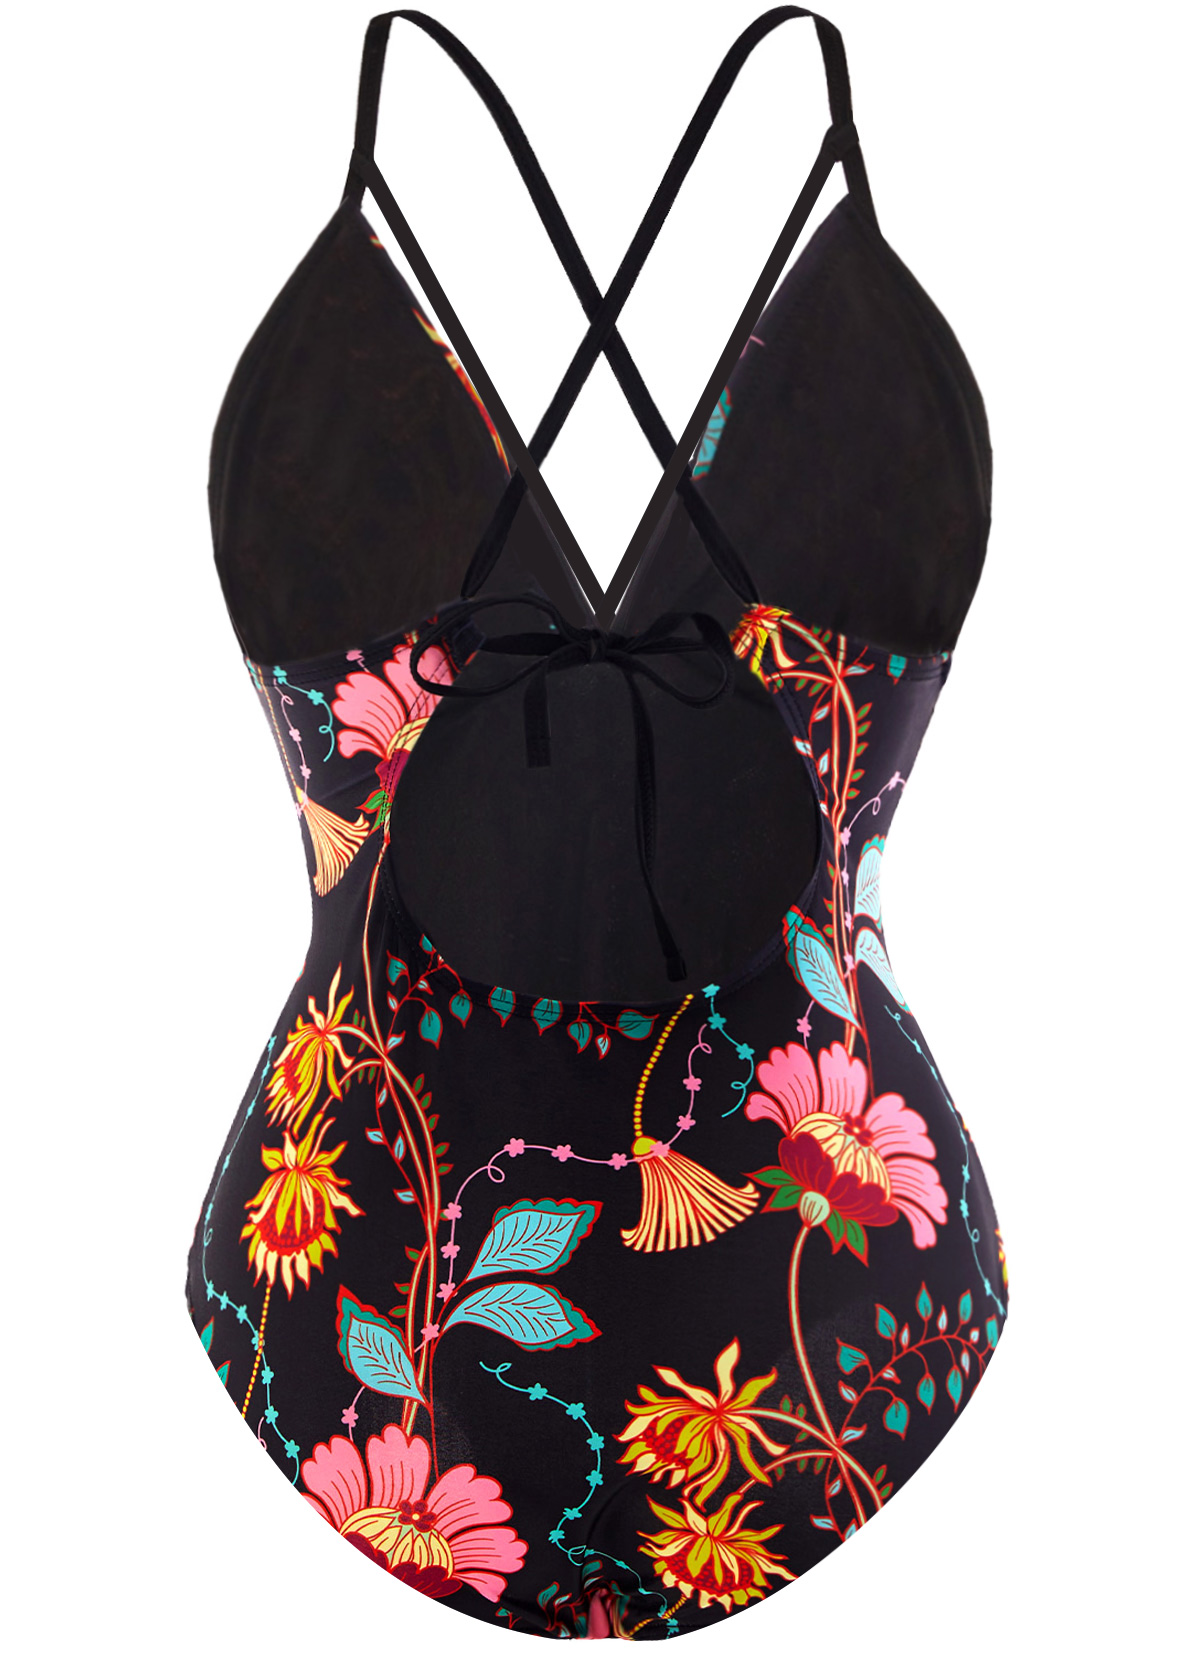 Lace Up Front Tie Back Floral Print One Piece Swimwear